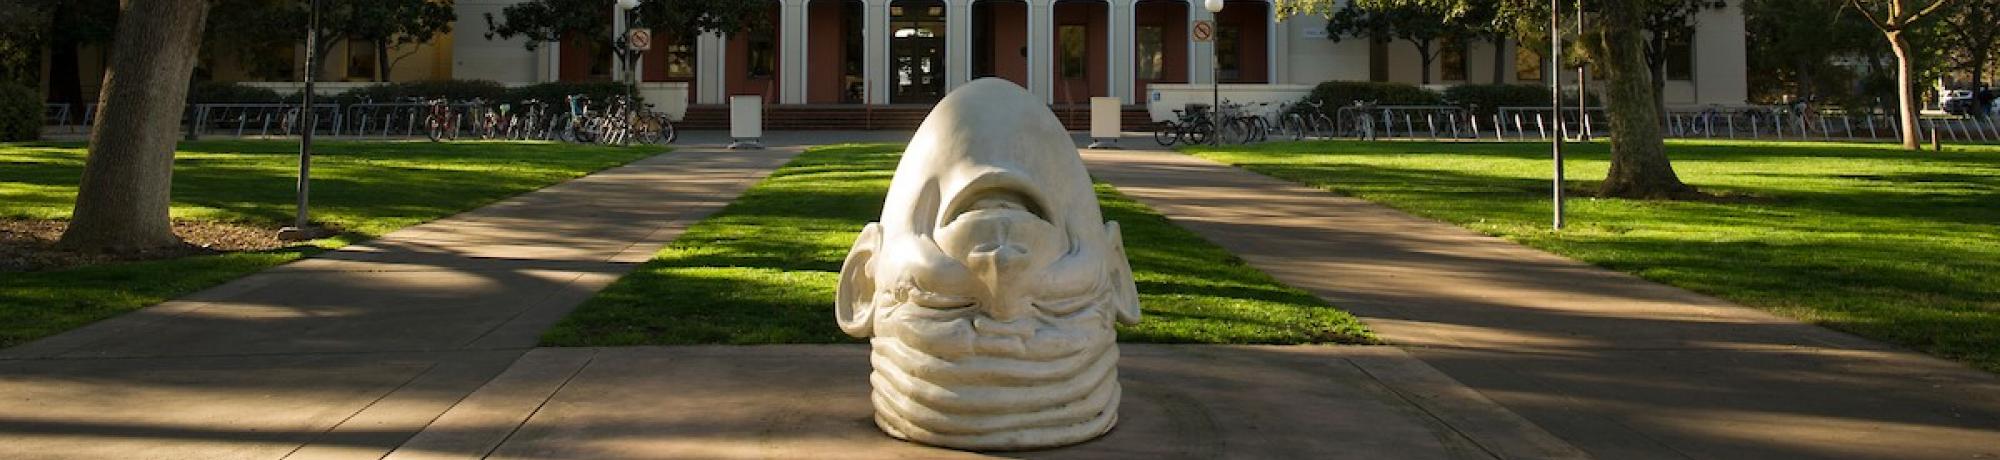 Egghead in front of Mrak Hall